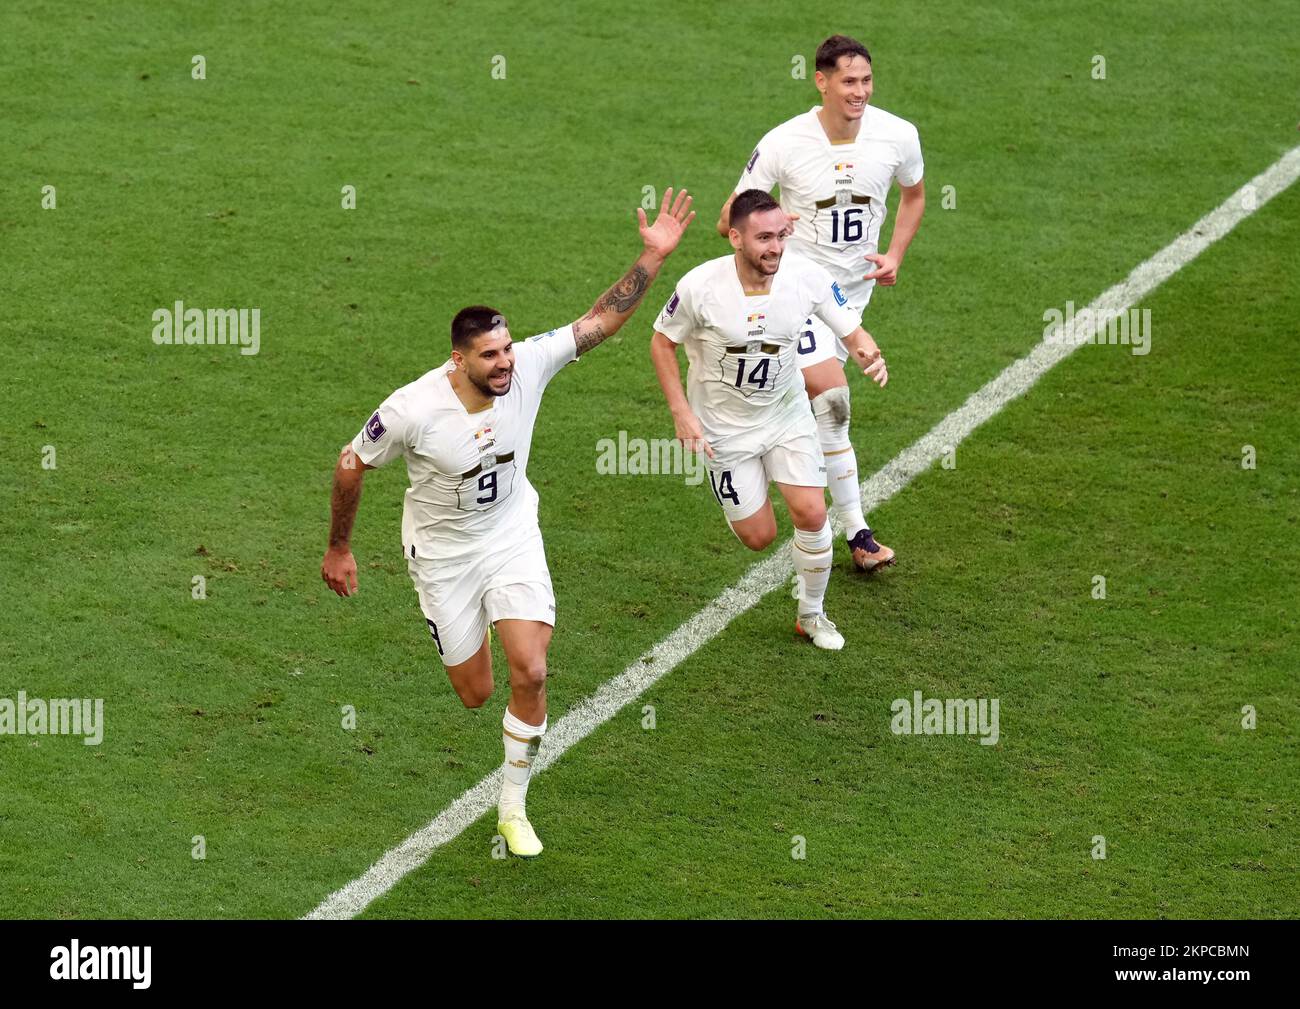 Serbia’s Aleksandar Mitrovic celebrates scoring their side's third goal of the game during the FIFA World Cup Group G match at the Al Janoub Stadium in Al Wakrah, Qatar. Picture date: Monday November 28, 2022. Stock Photo